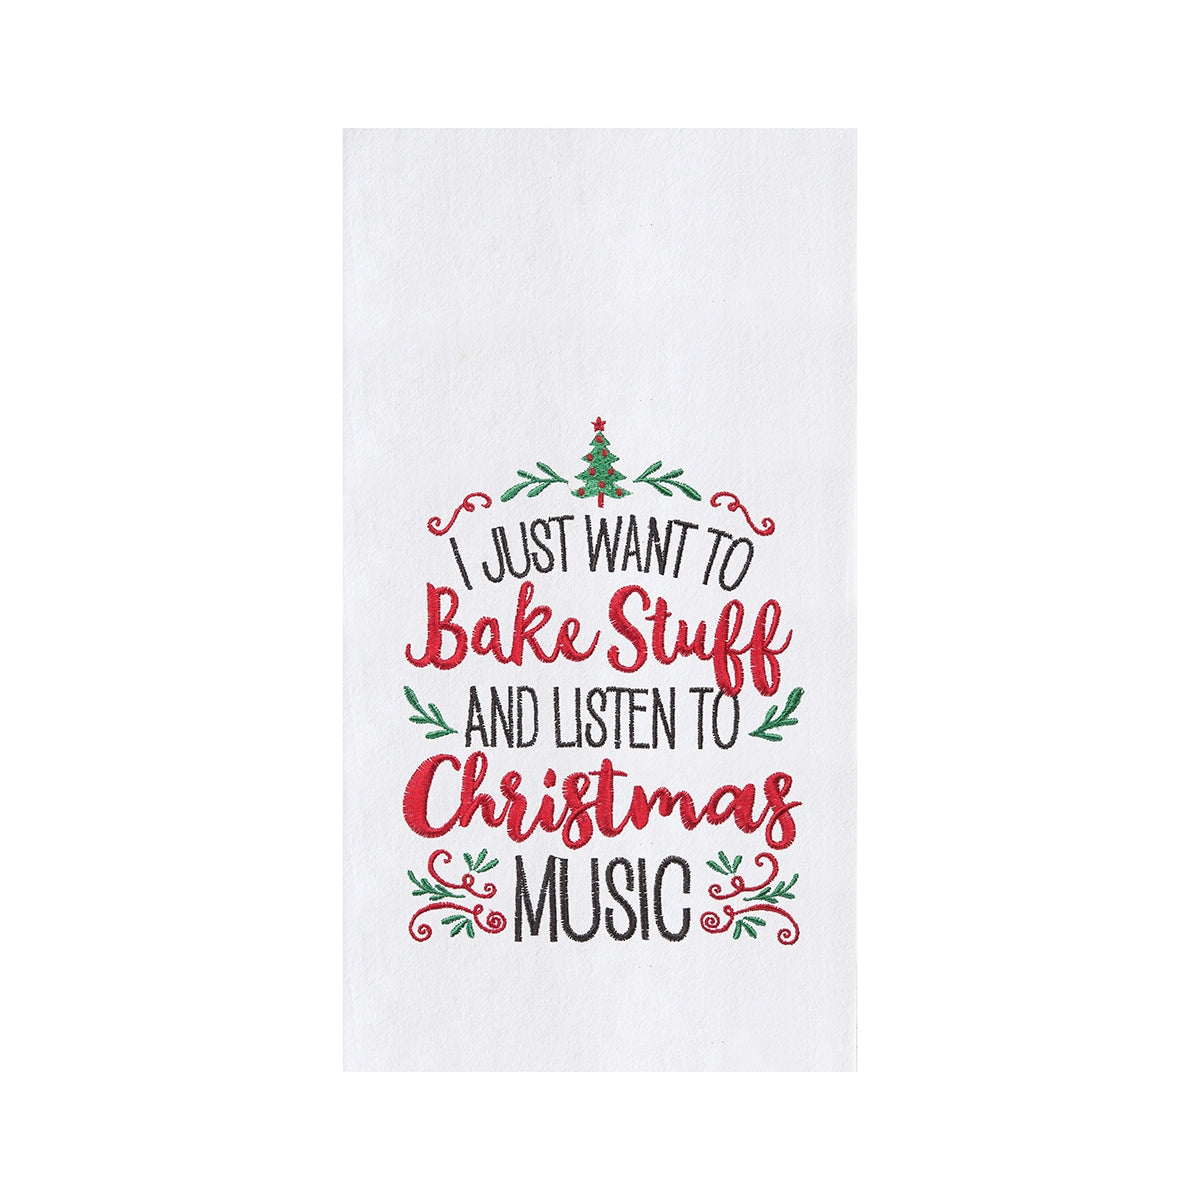 I Just Want To Bake Stuff and Listen To Christmas Music - Flour Sack Kitchen Towel    